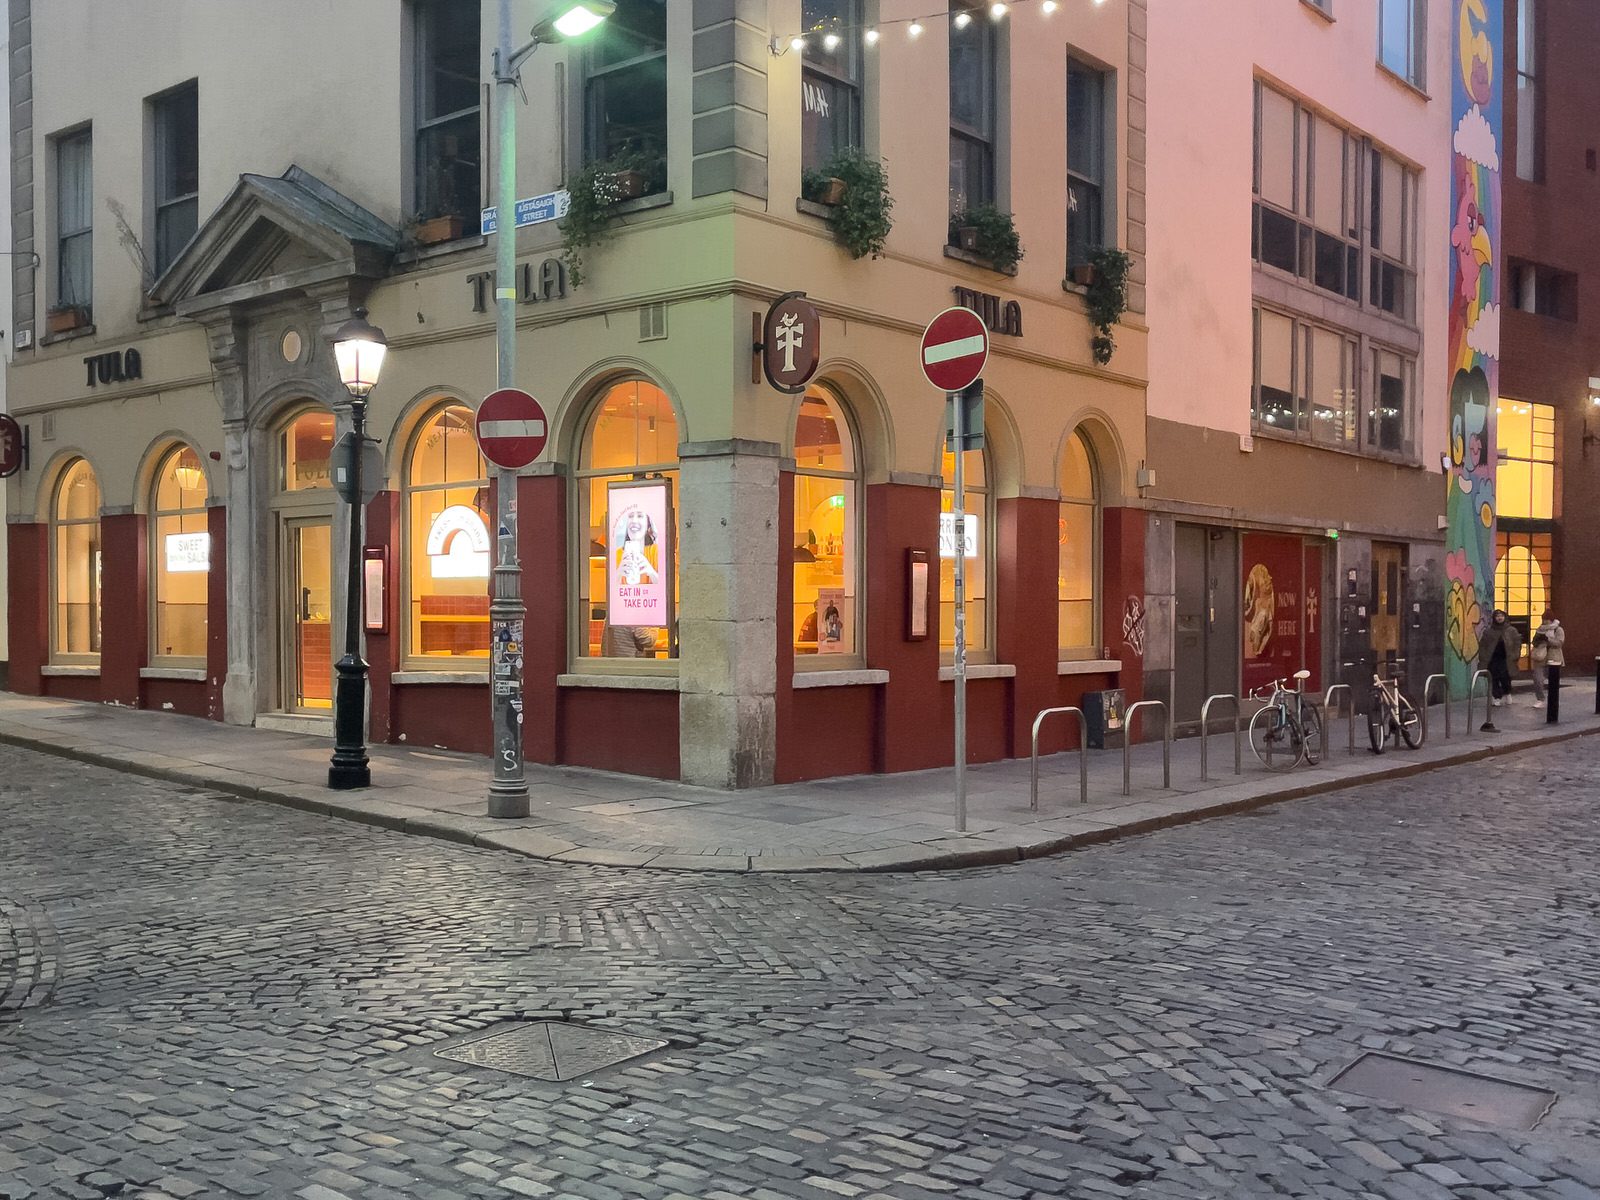 I VISITED TEMPLE BAR TODAY [AS NIGHTFALL WAS APPROACHING]-225361-1